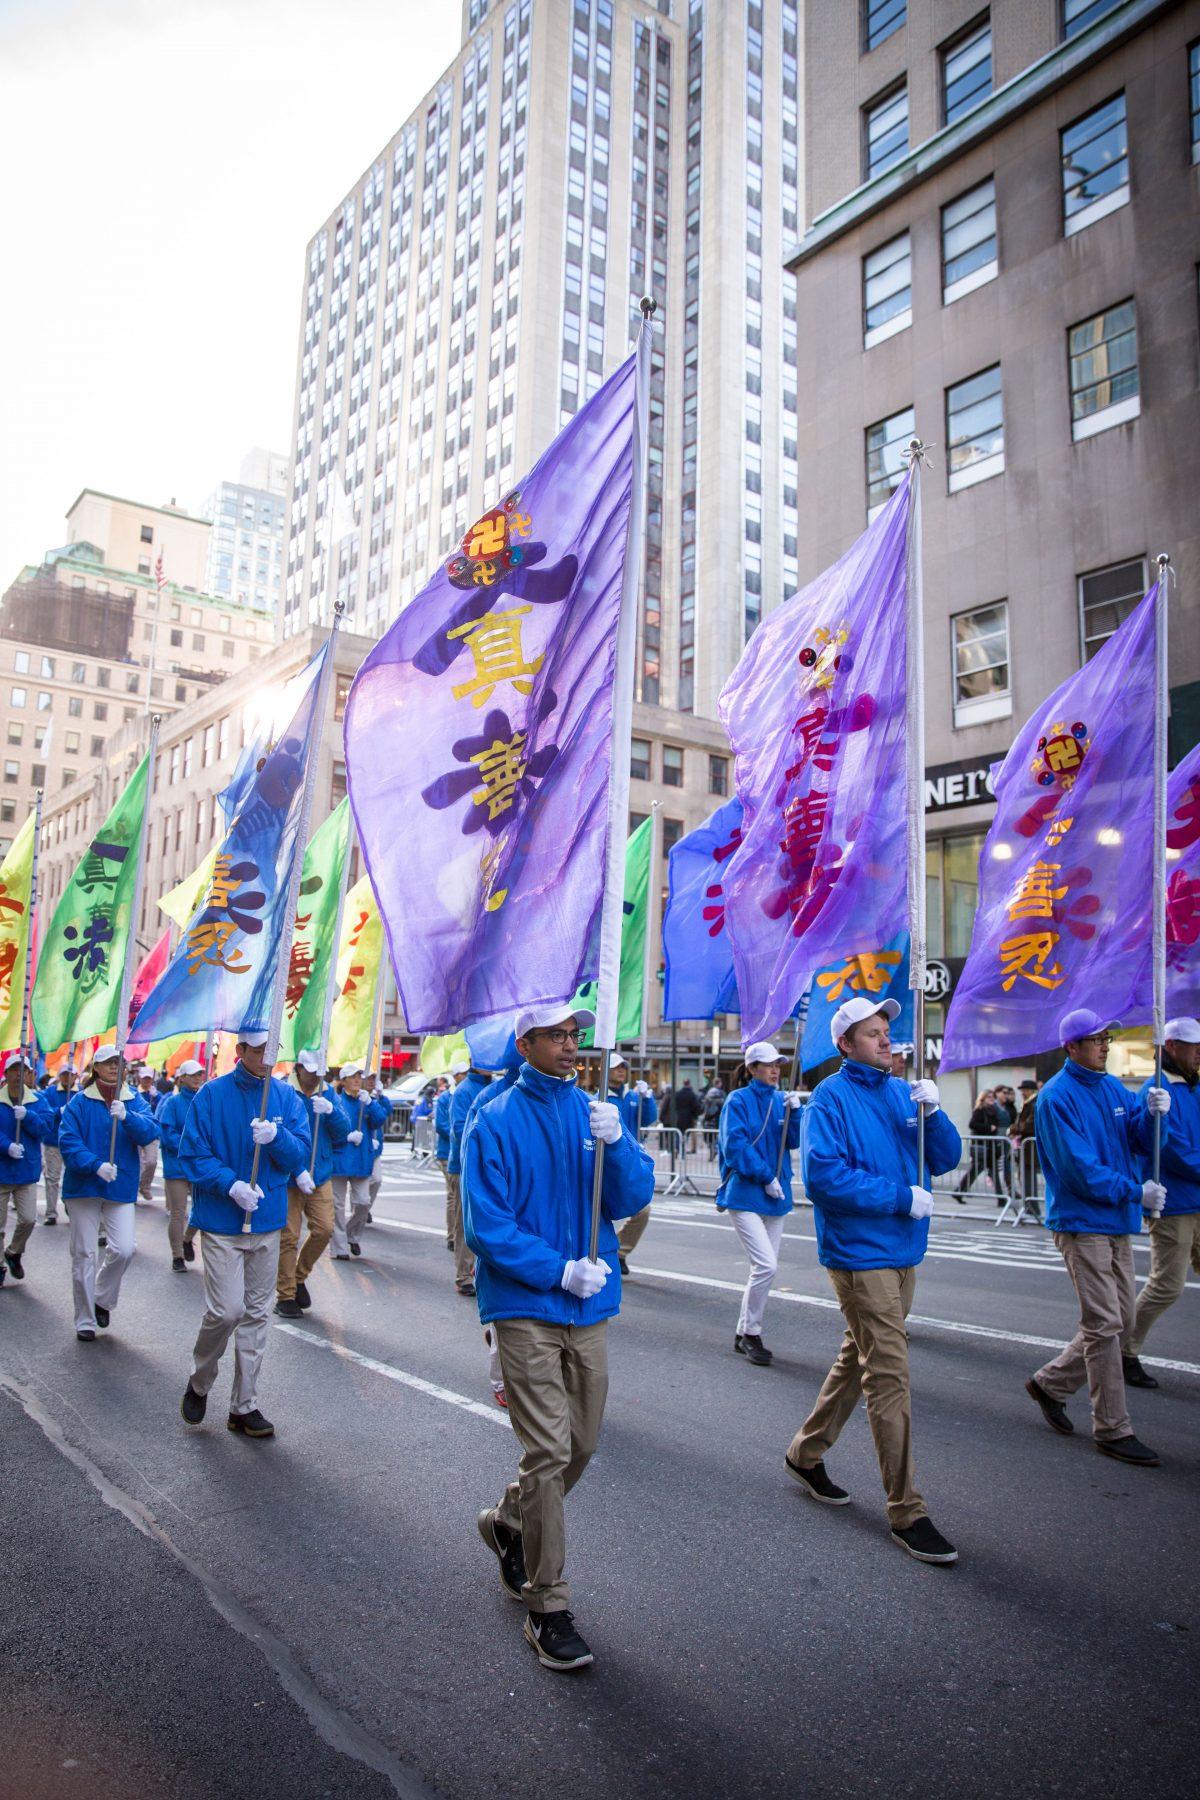 Falun Gong practitioners march in the in the Veterans Day Memorial parade in New York on Nov. 11, 2017. (Benjamin Chasteen/The Epoch Times)